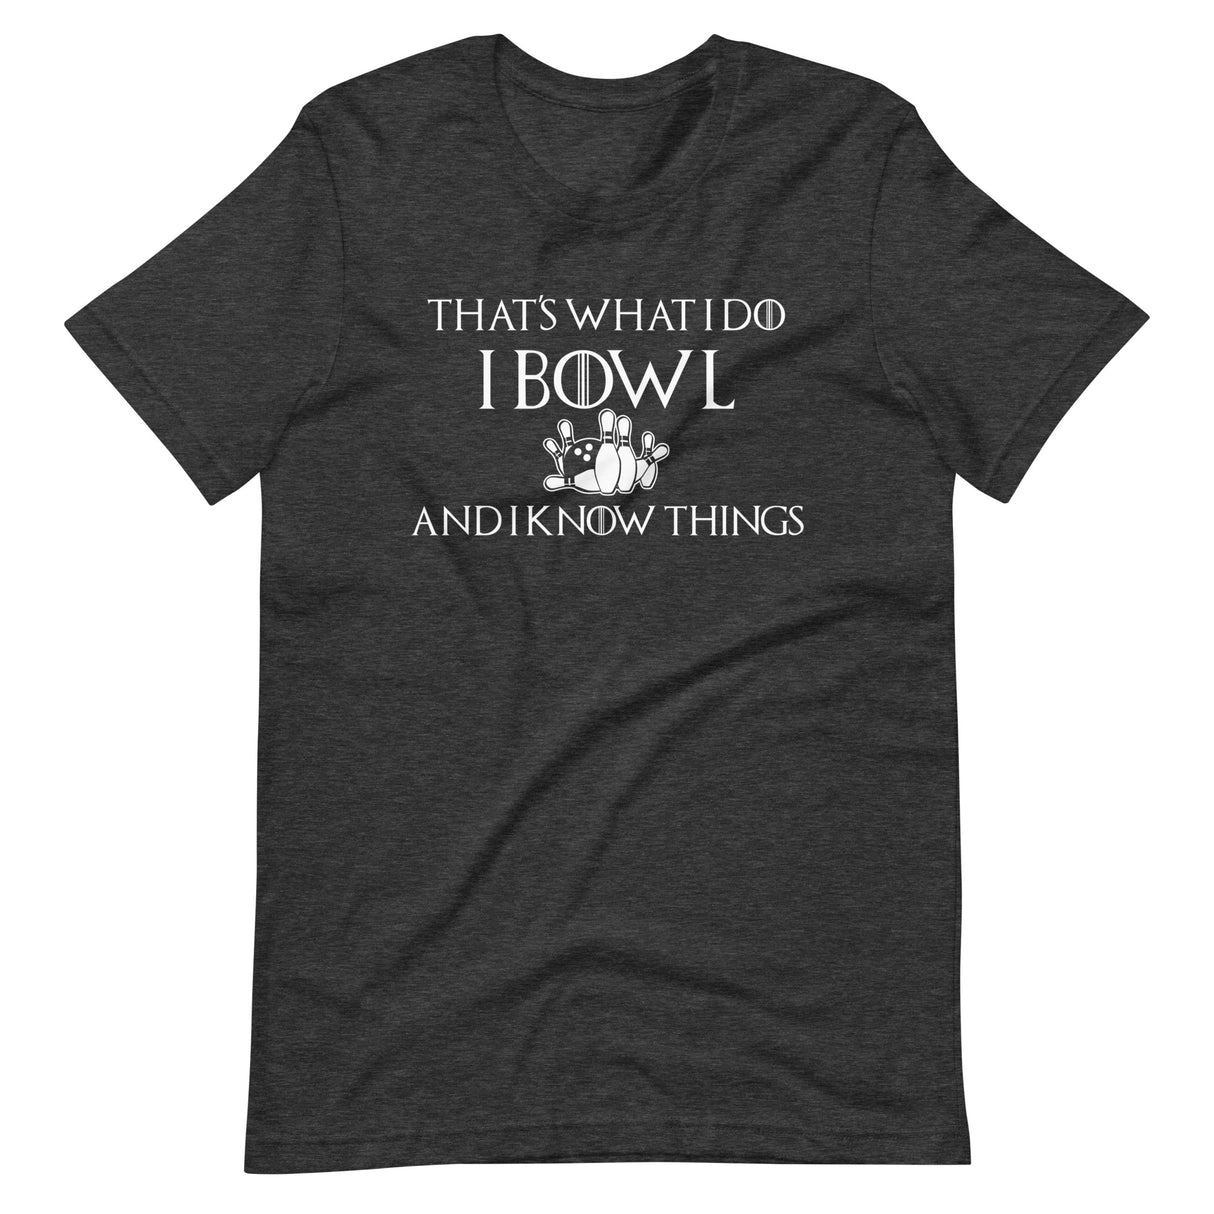 I Bowl and I Know Things Shirt